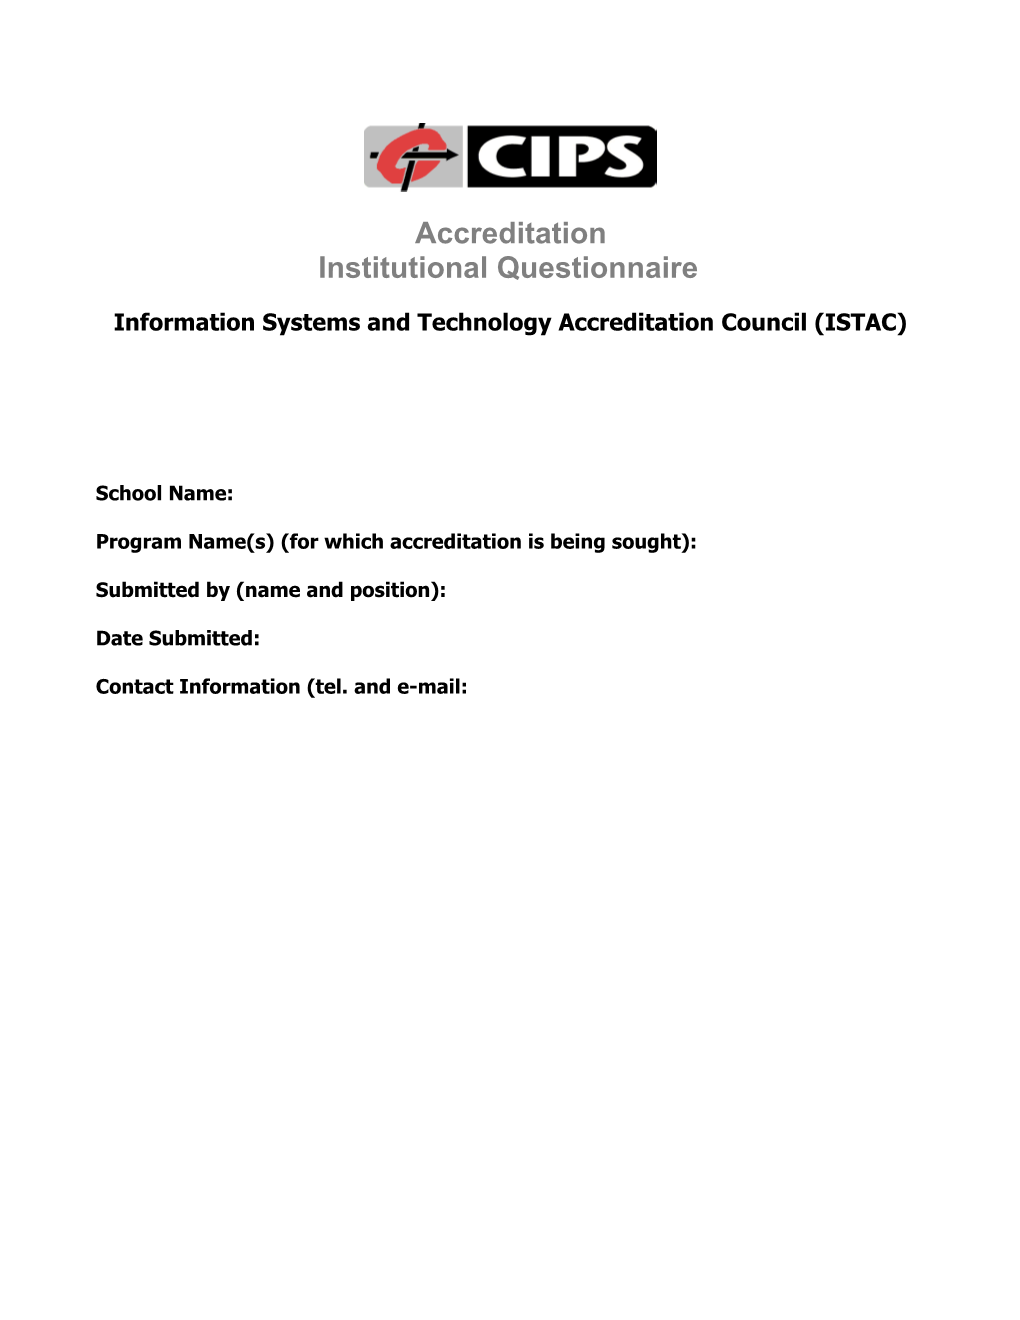 Information Systems and Technology Accreditation Council (ISTAC)